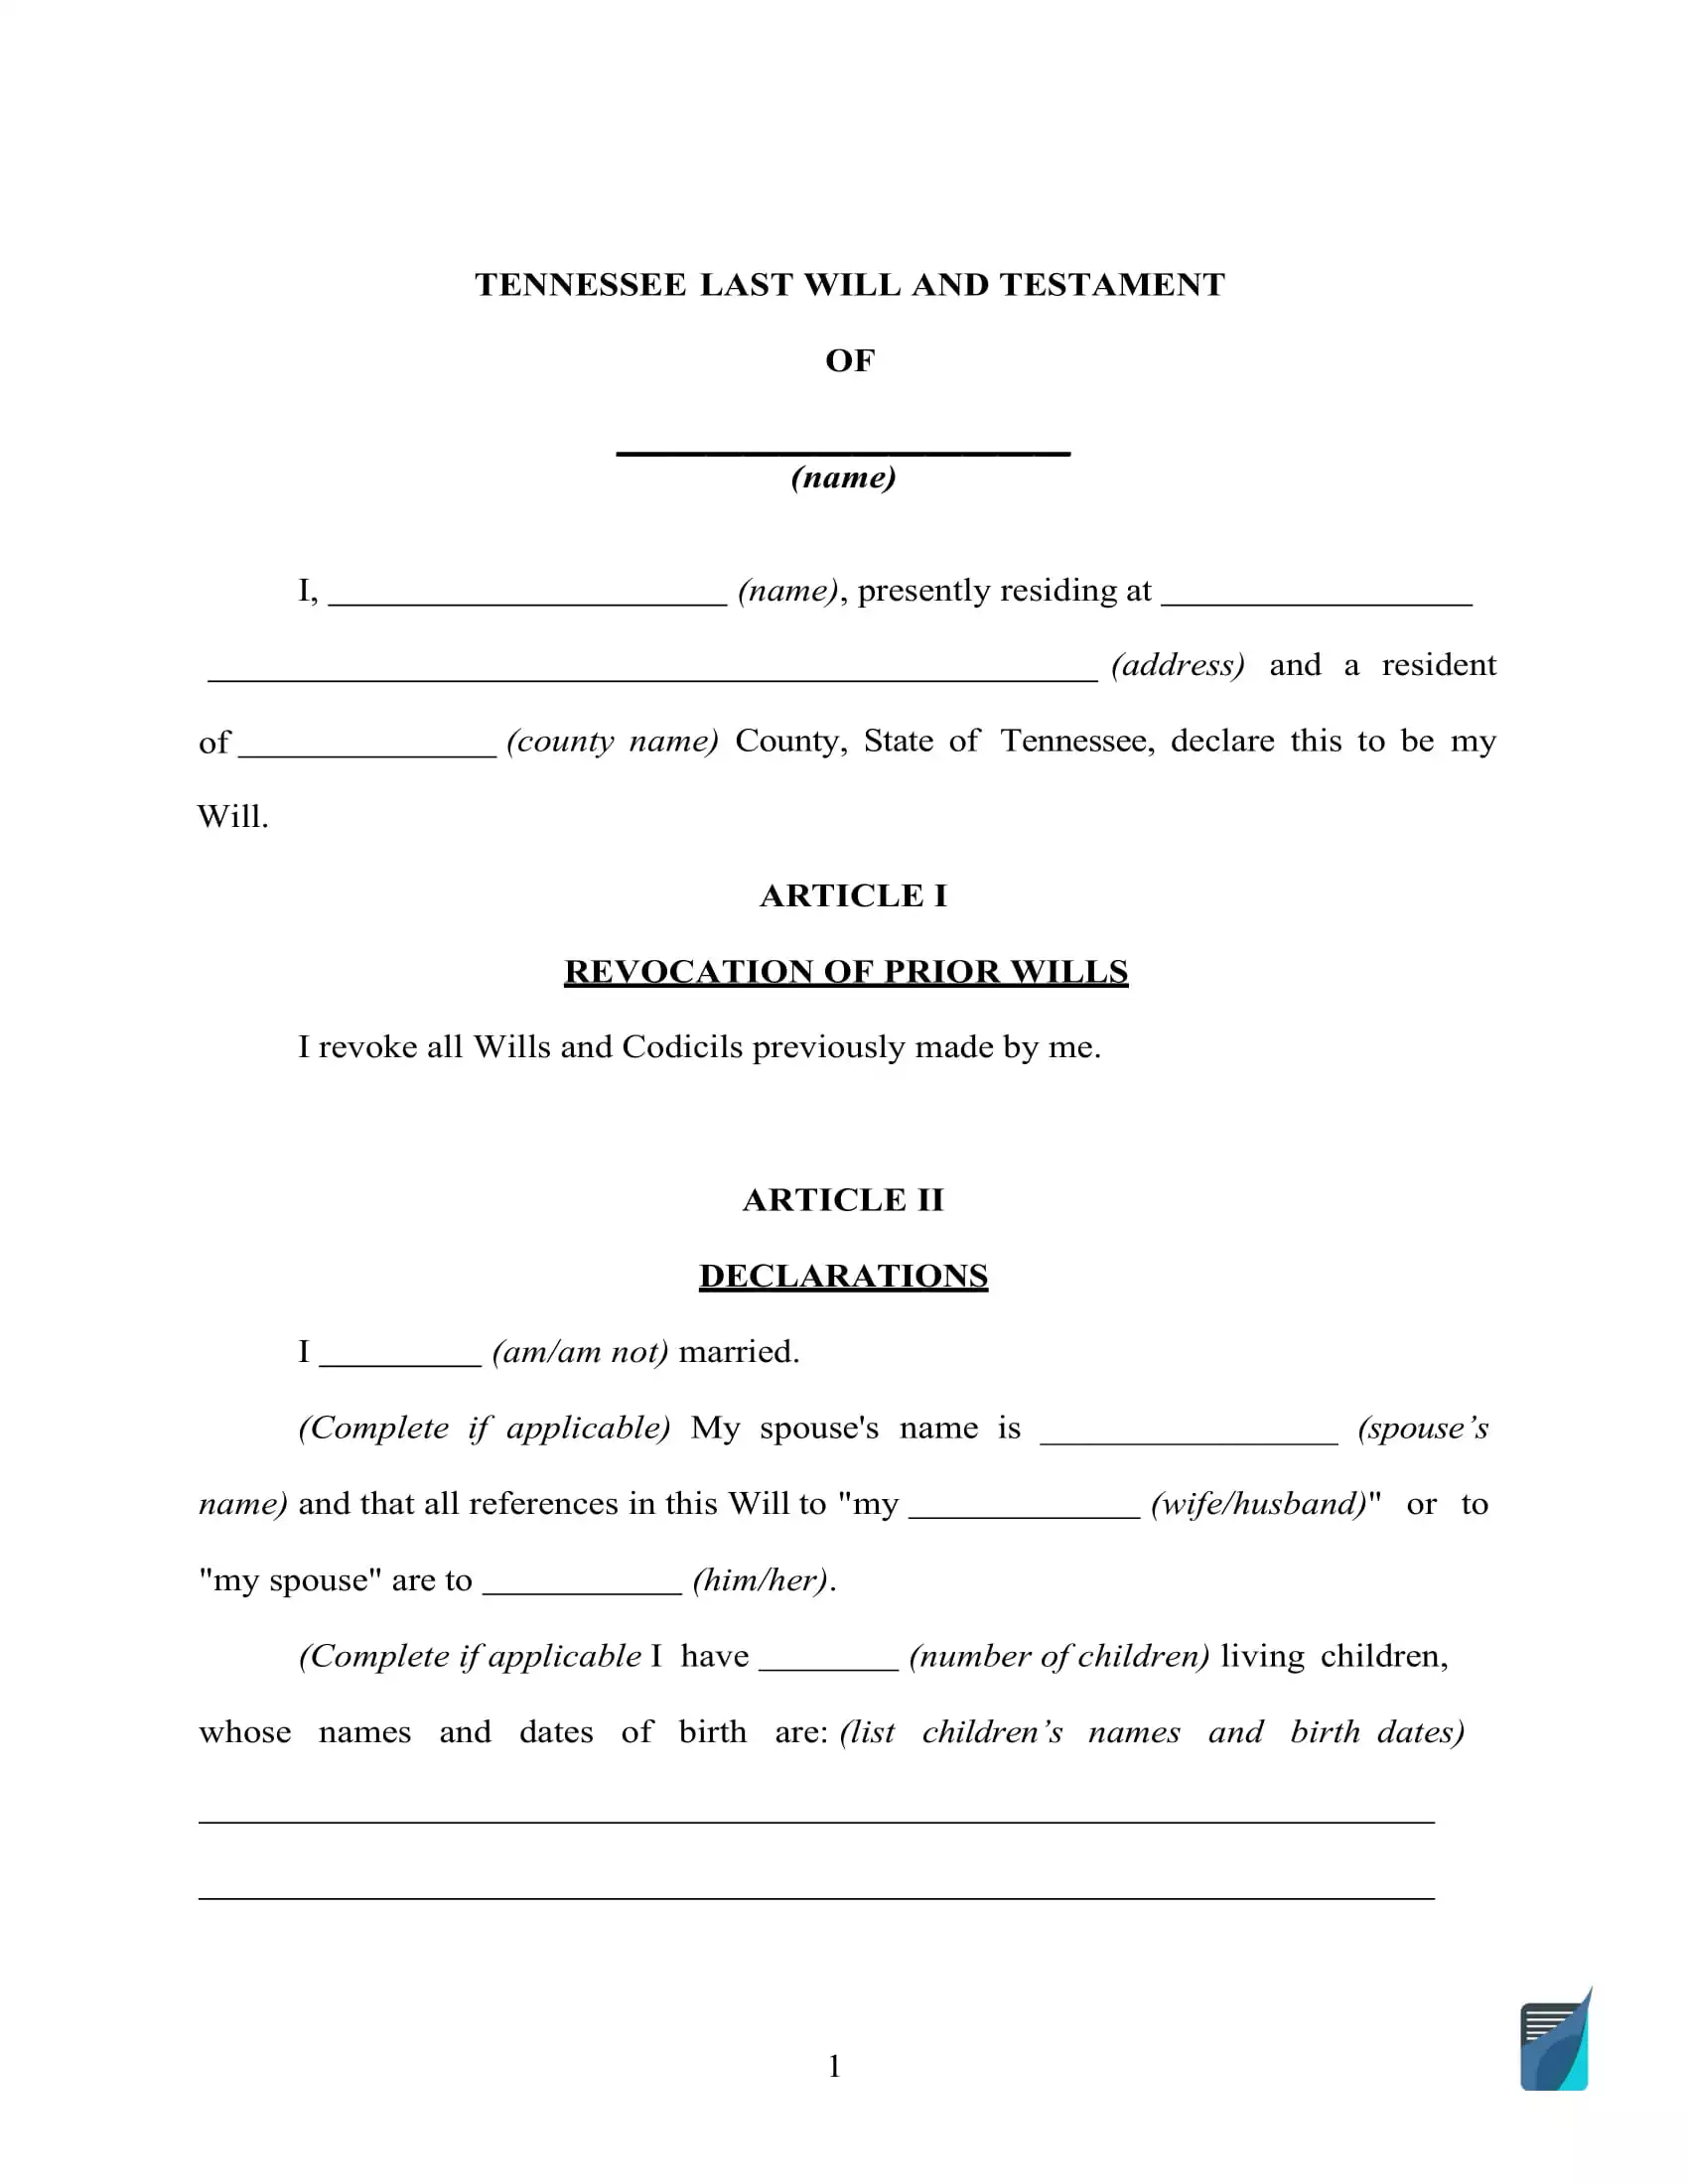 tennessee-last-will-and-testament-template